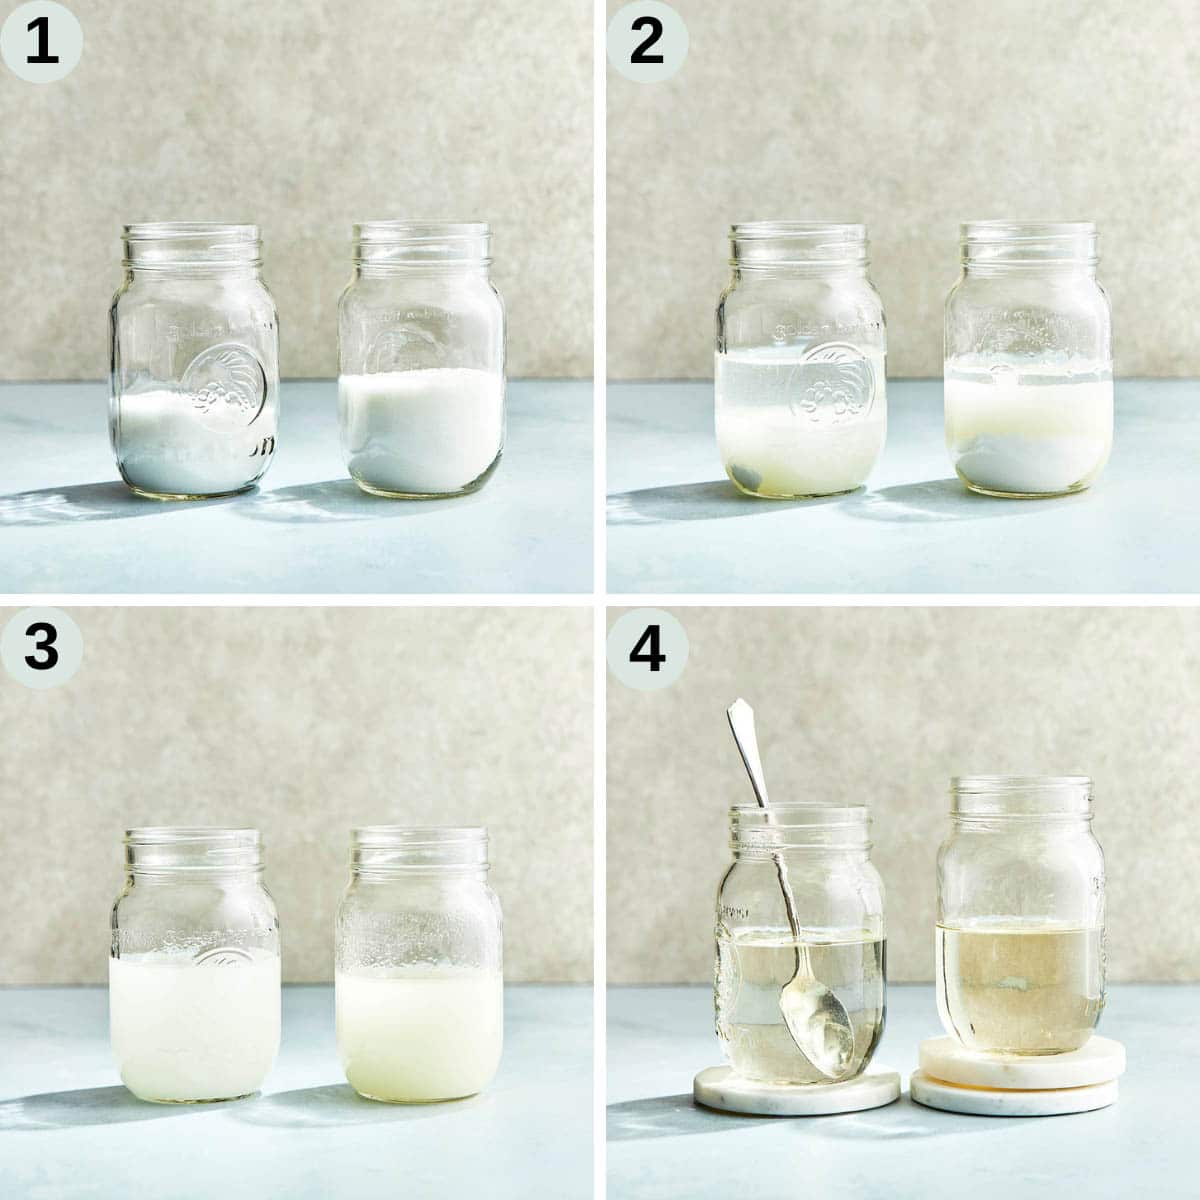 Process shots on how to make basic simple syrup and rich simple syrup.